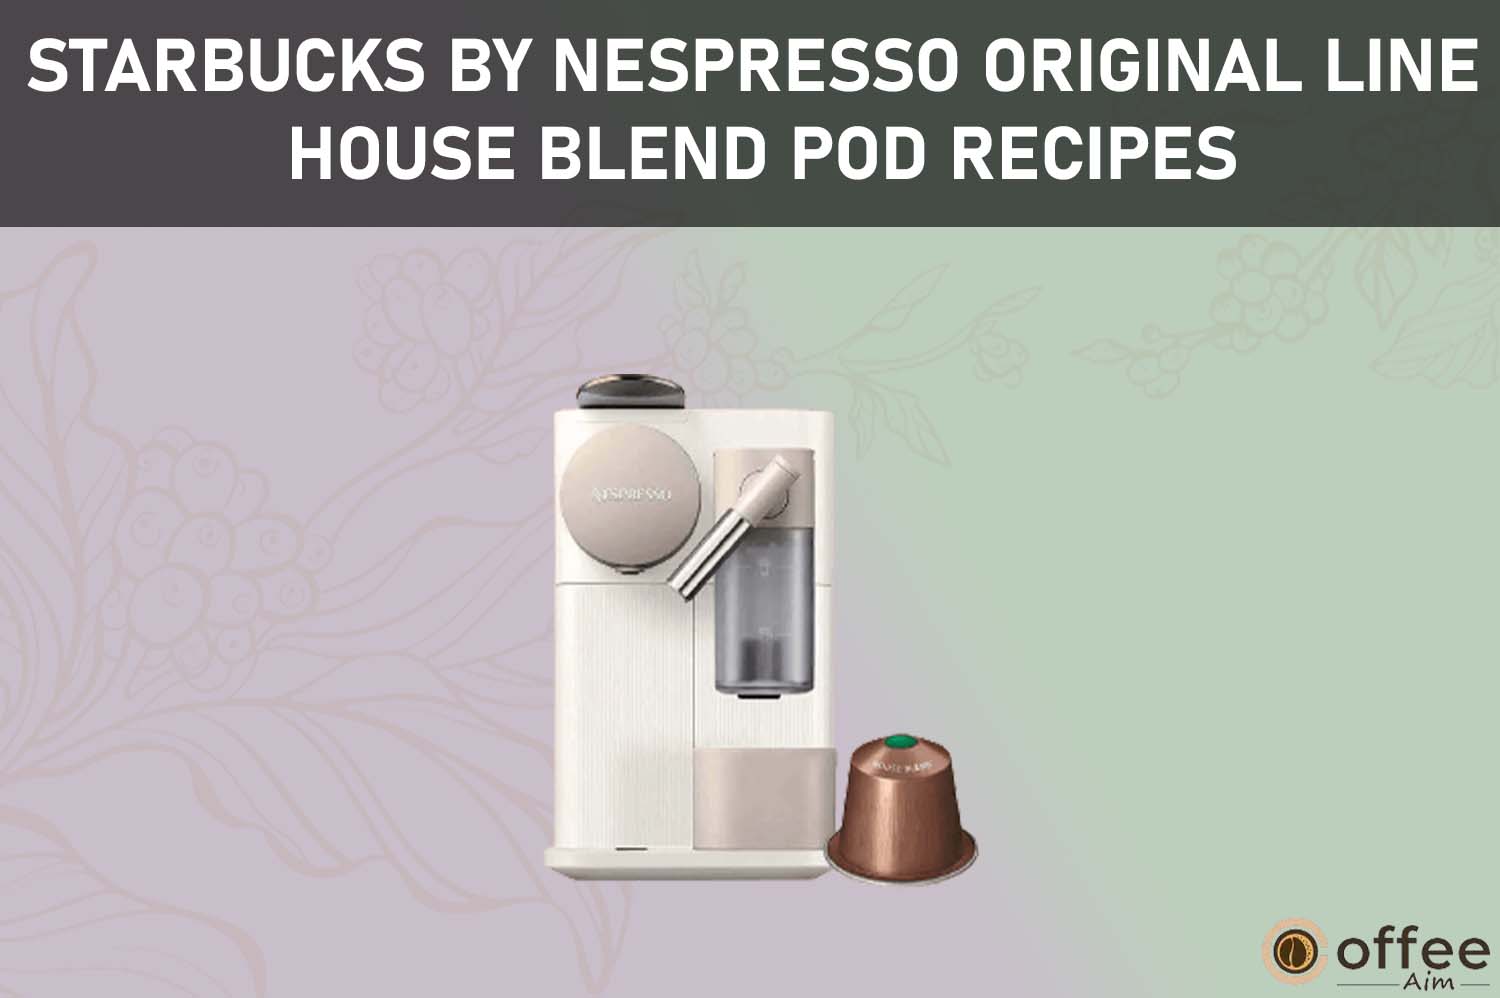 Featured image for the article "Starbucks by Nespresso Original Line House Blend Pod Recipes"